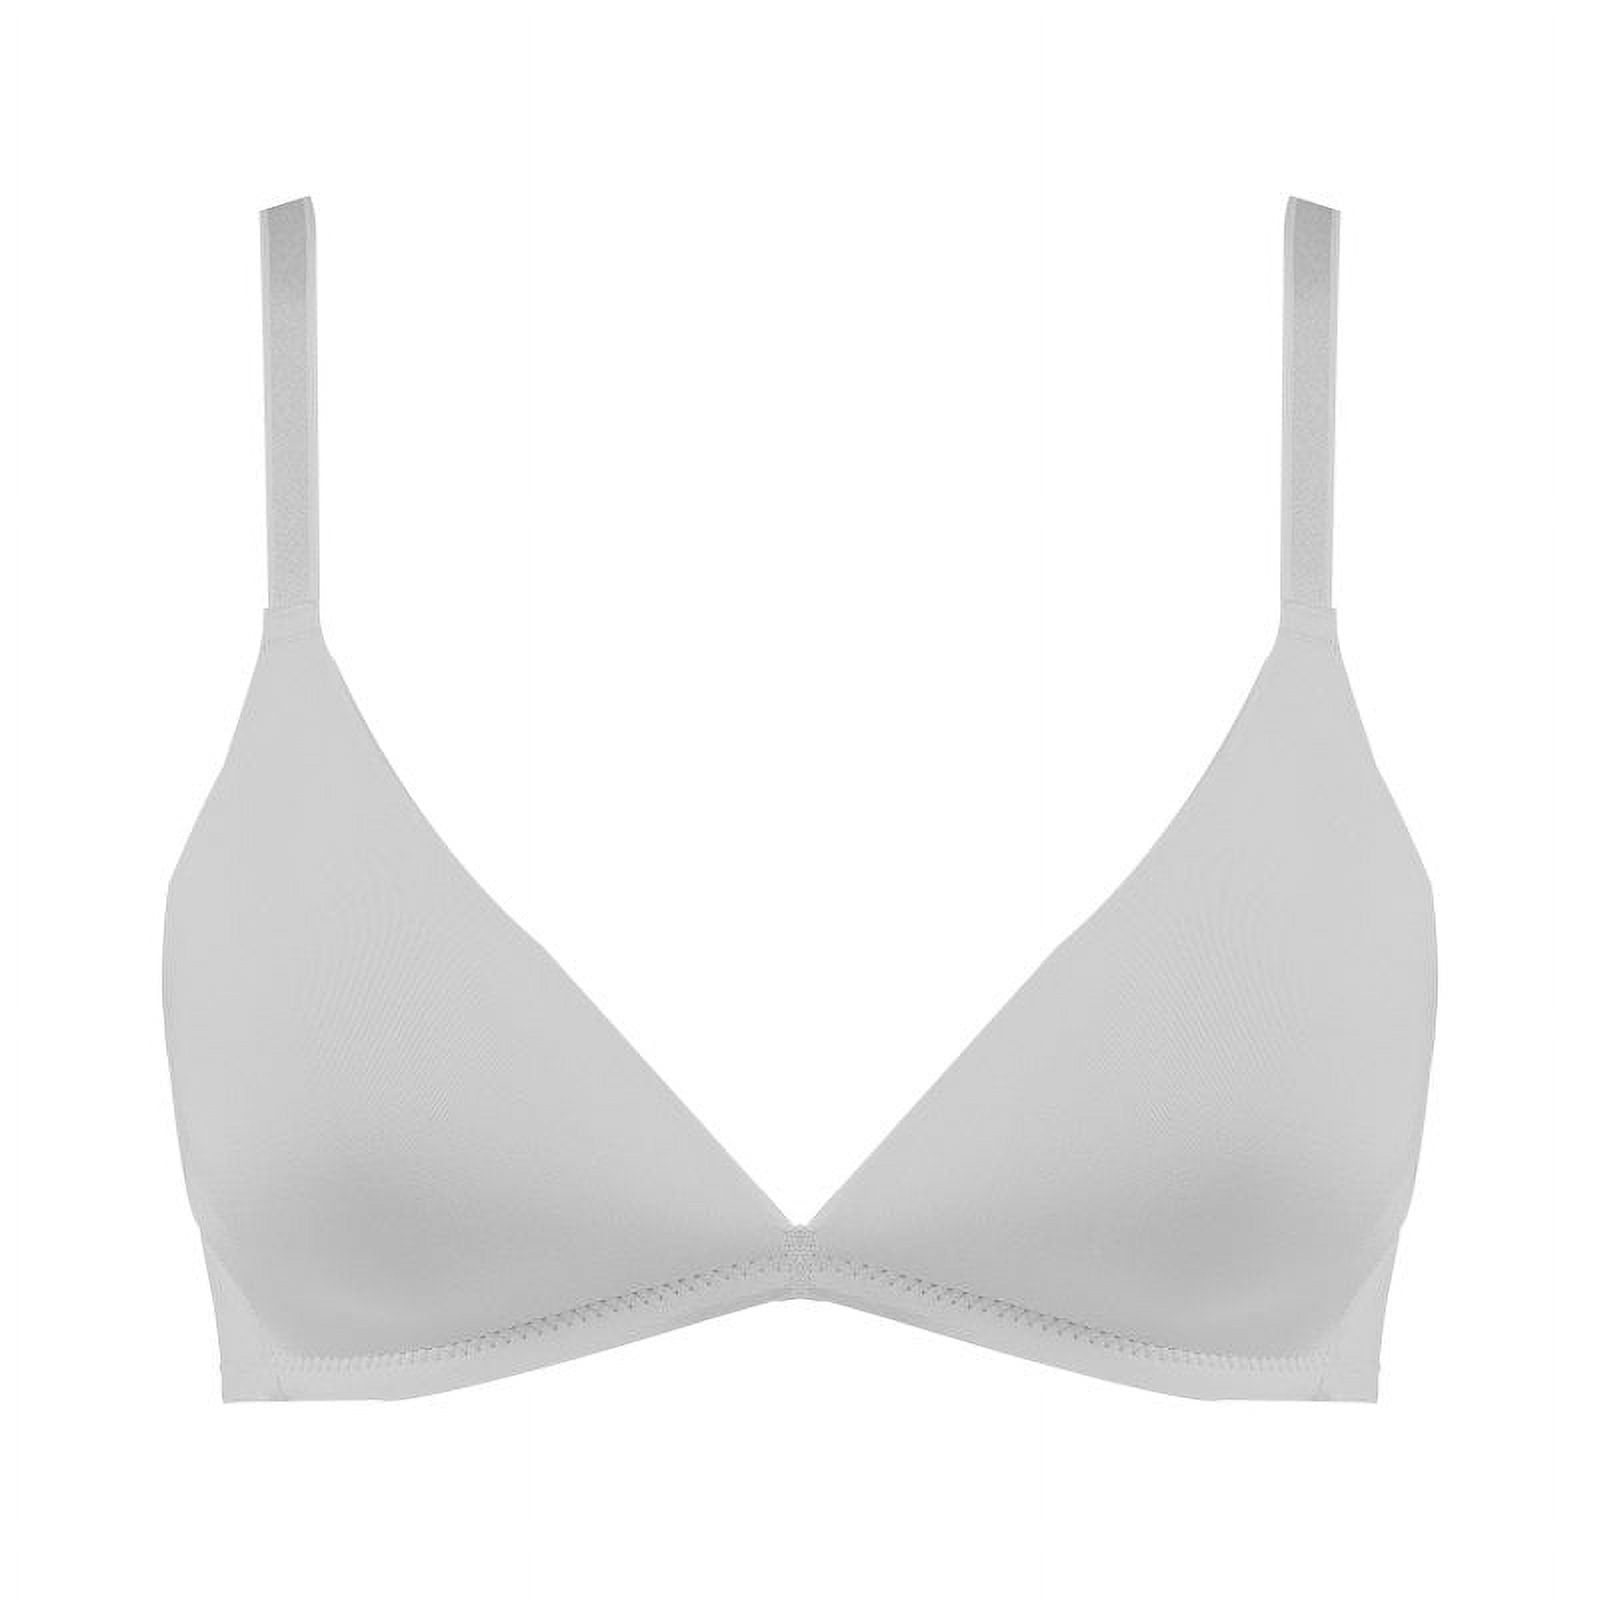  YONGHS Women's Sheer Mesh Halter Neck Underboob Crop Top  Transparent Unlined Bustier Underwear White Large: Clothing, Shoes & Jewelry